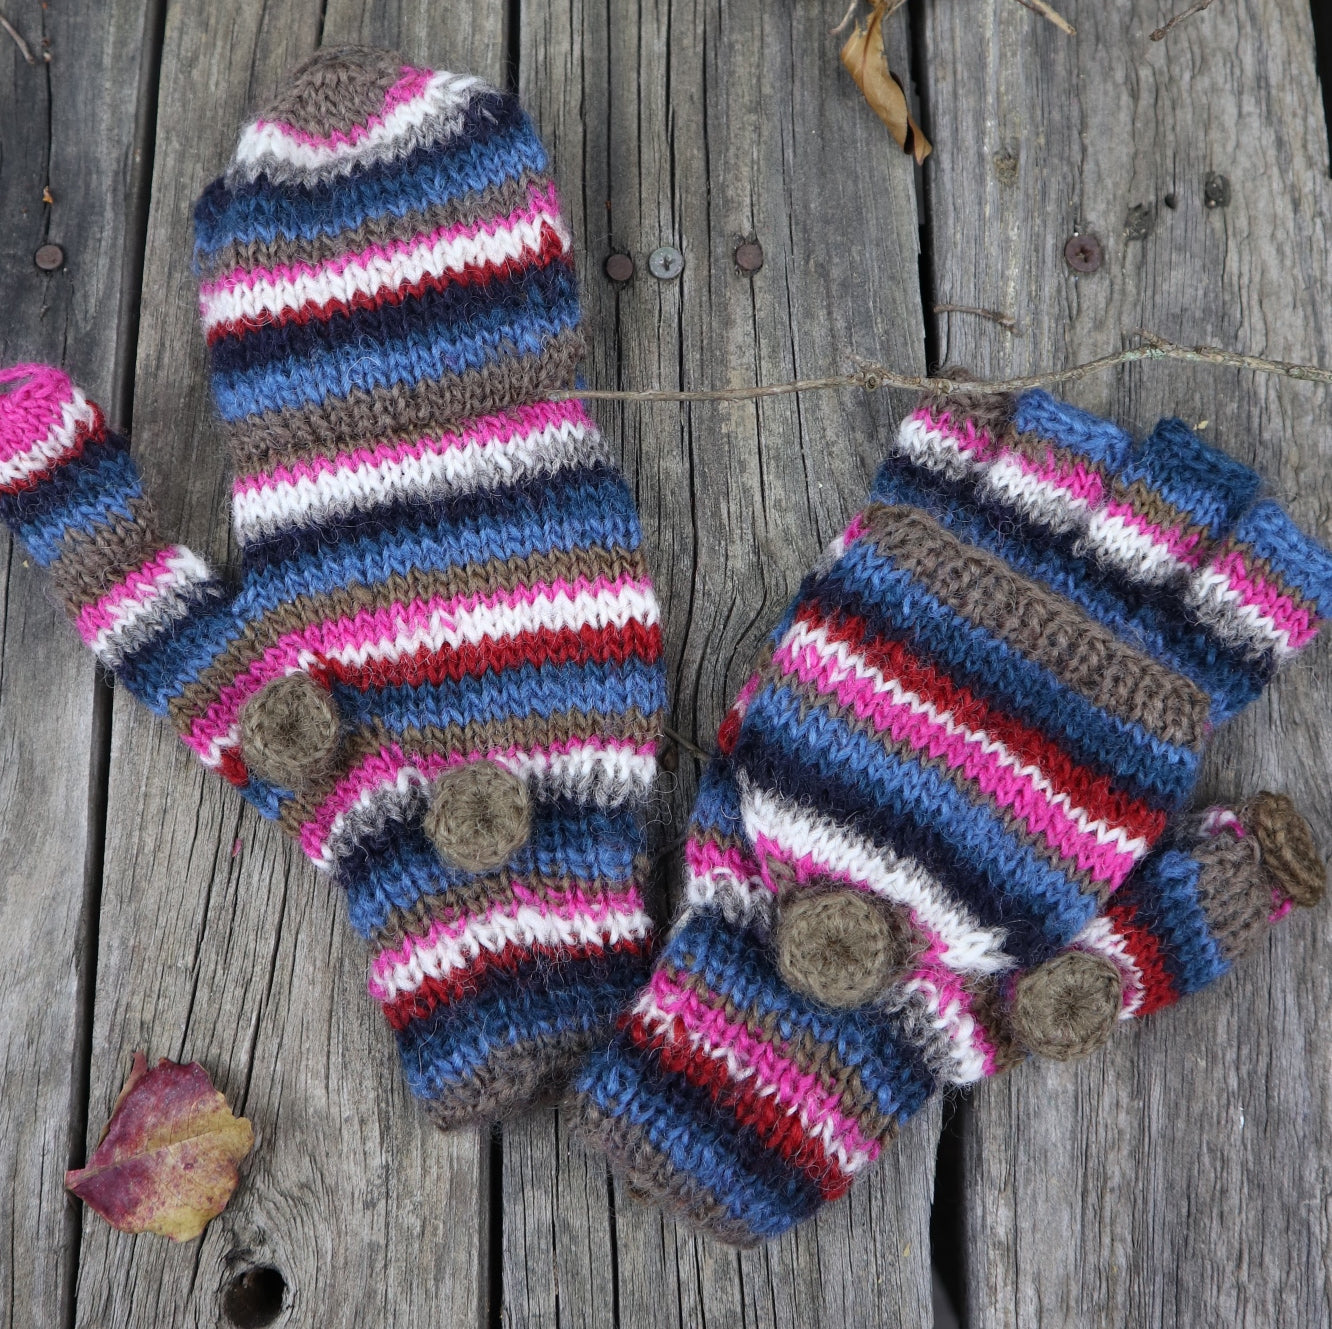 Fair Trade Ethical Children's Striped Fingerless Gloves with Cap in Pink, Brown and Black